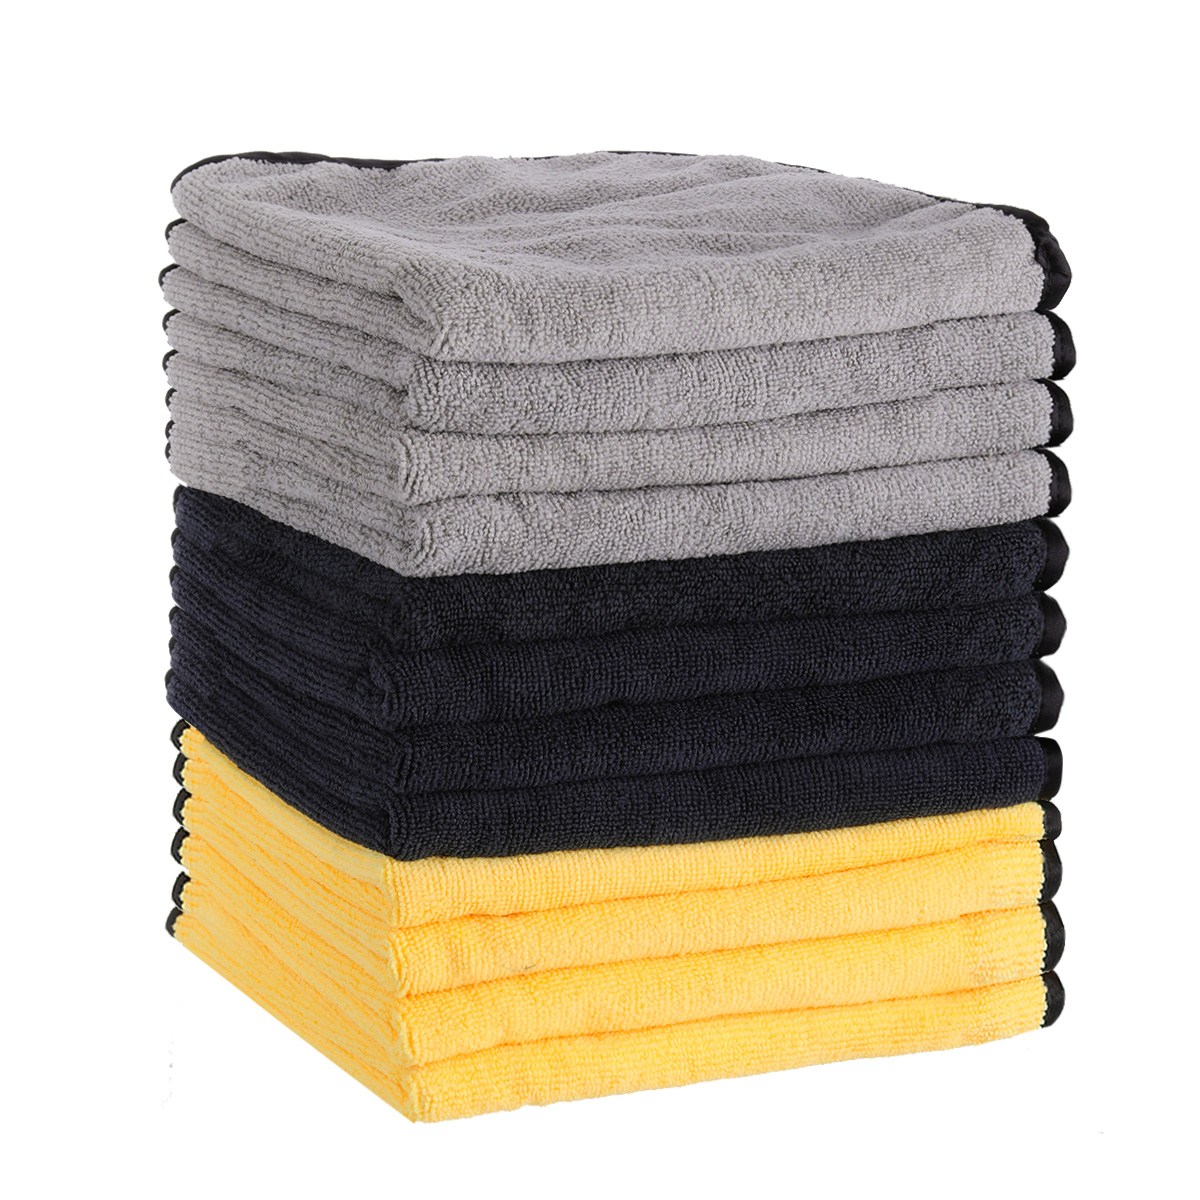 12 Pack 16 x 16'' Microfiber Cleaning Cloths with grey & black & yellow